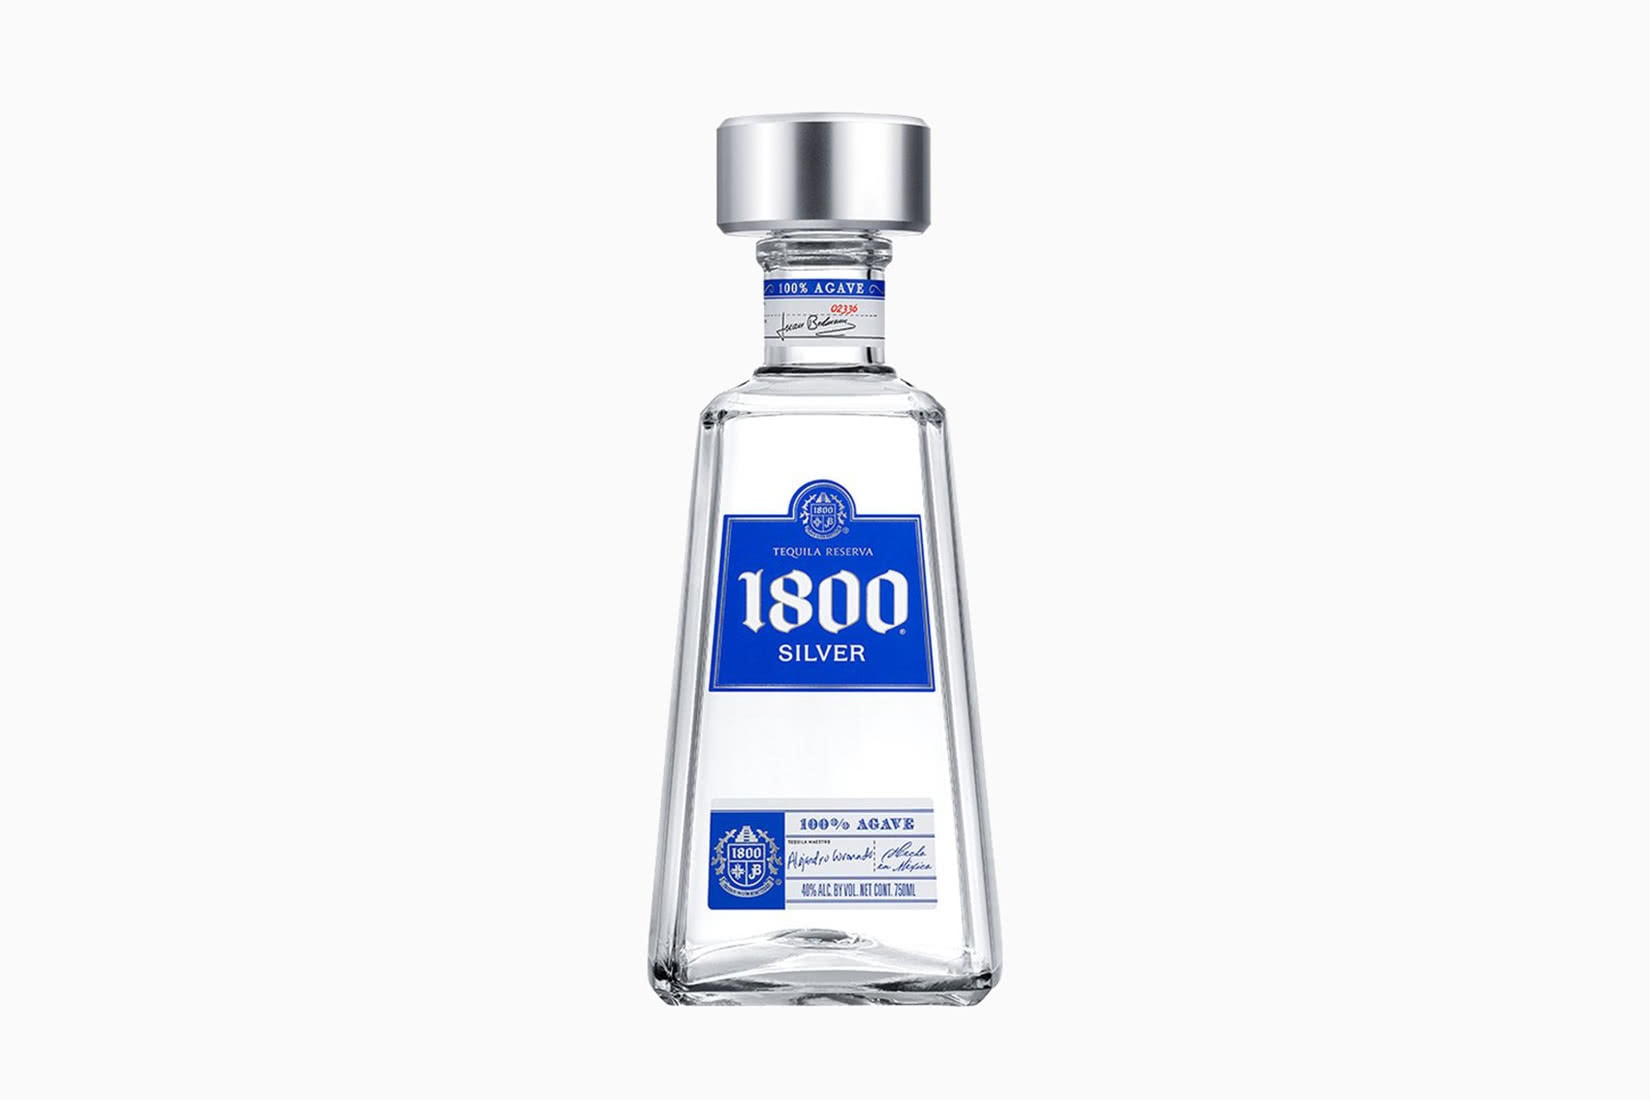 1800 Tequila Price List Find The Perfect Bottle Of Tequila Guide